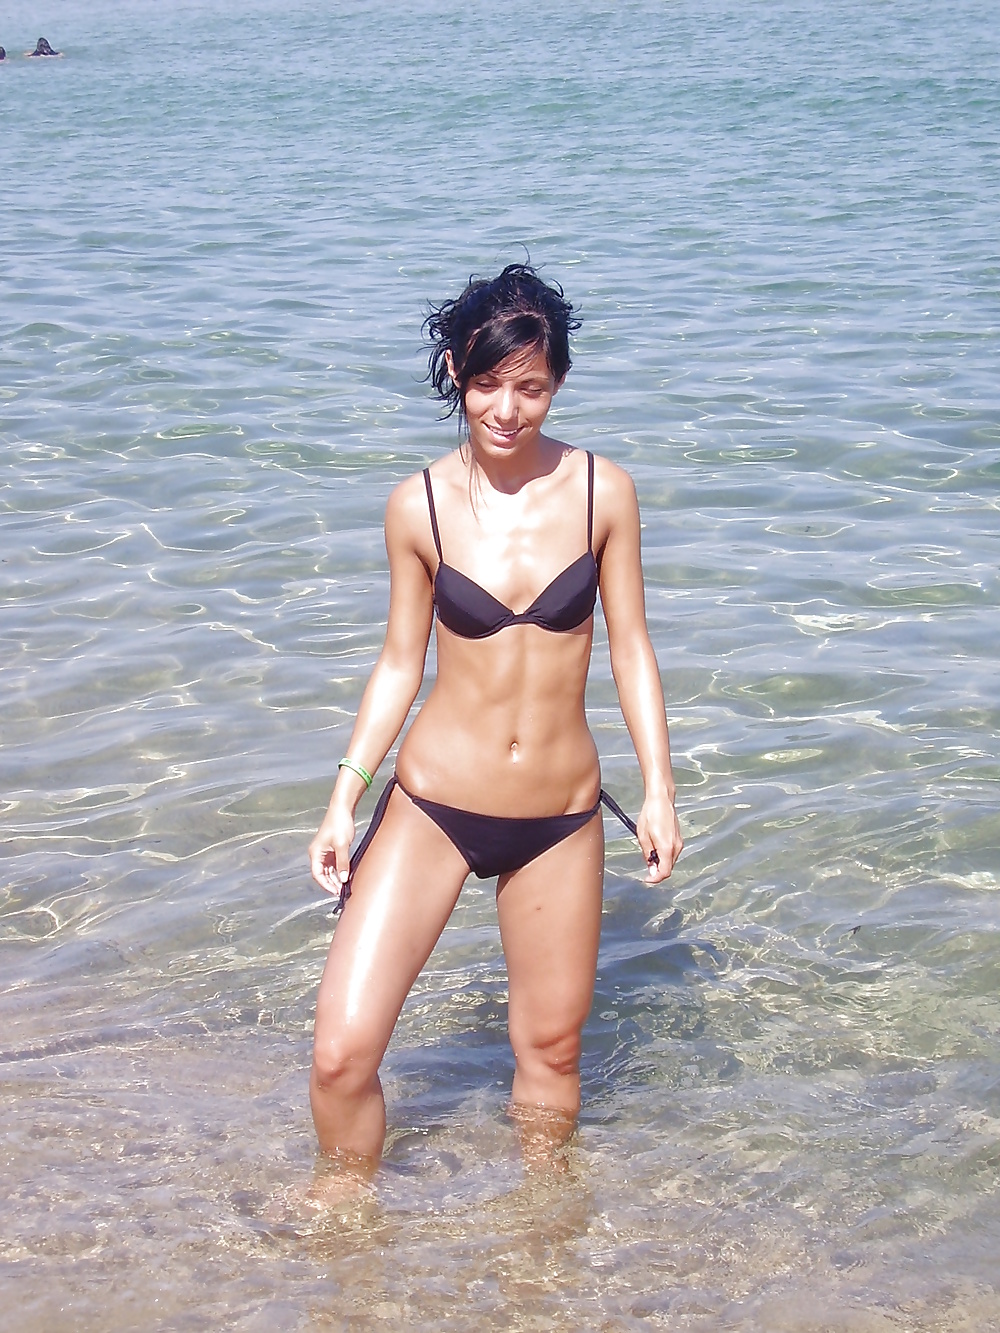 100 % Italiane - Collection Edition - Gallery 7 adult photos